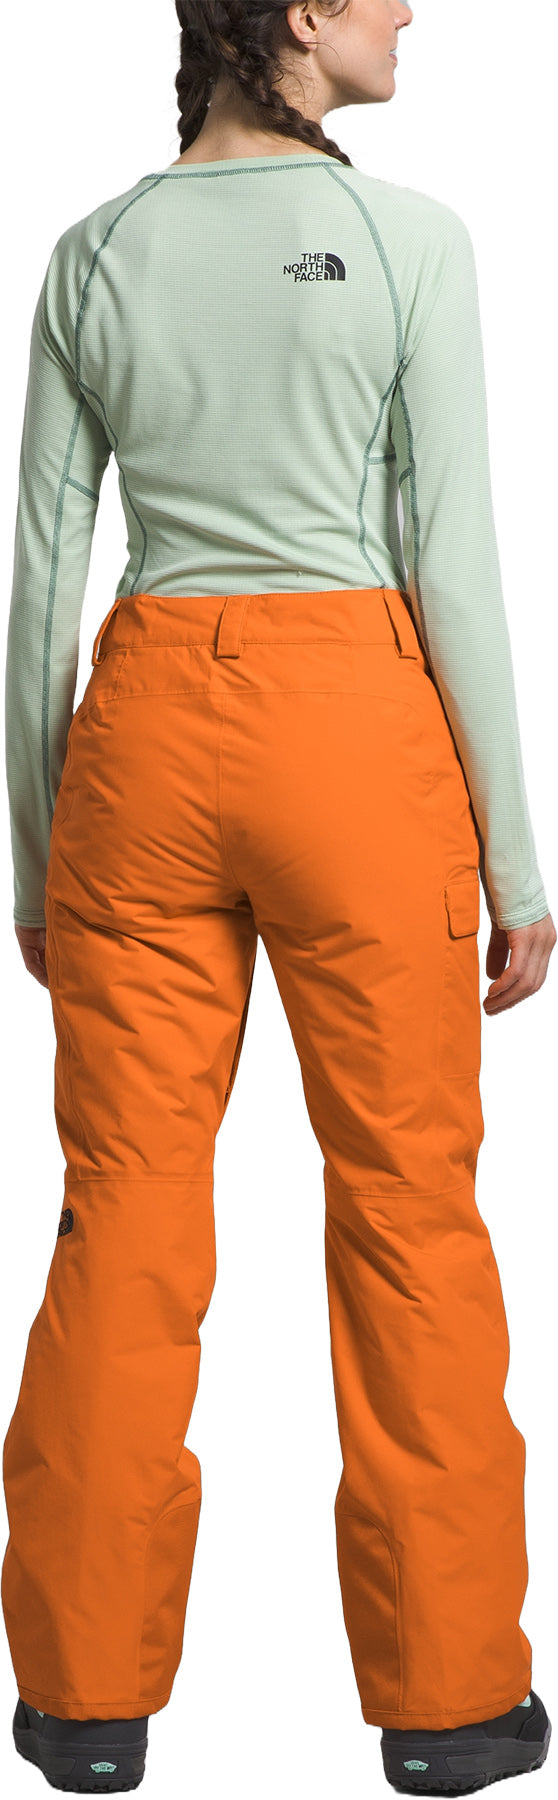 The North Face Freedom Insulated Pant - Ski trousers Girls, Buy online